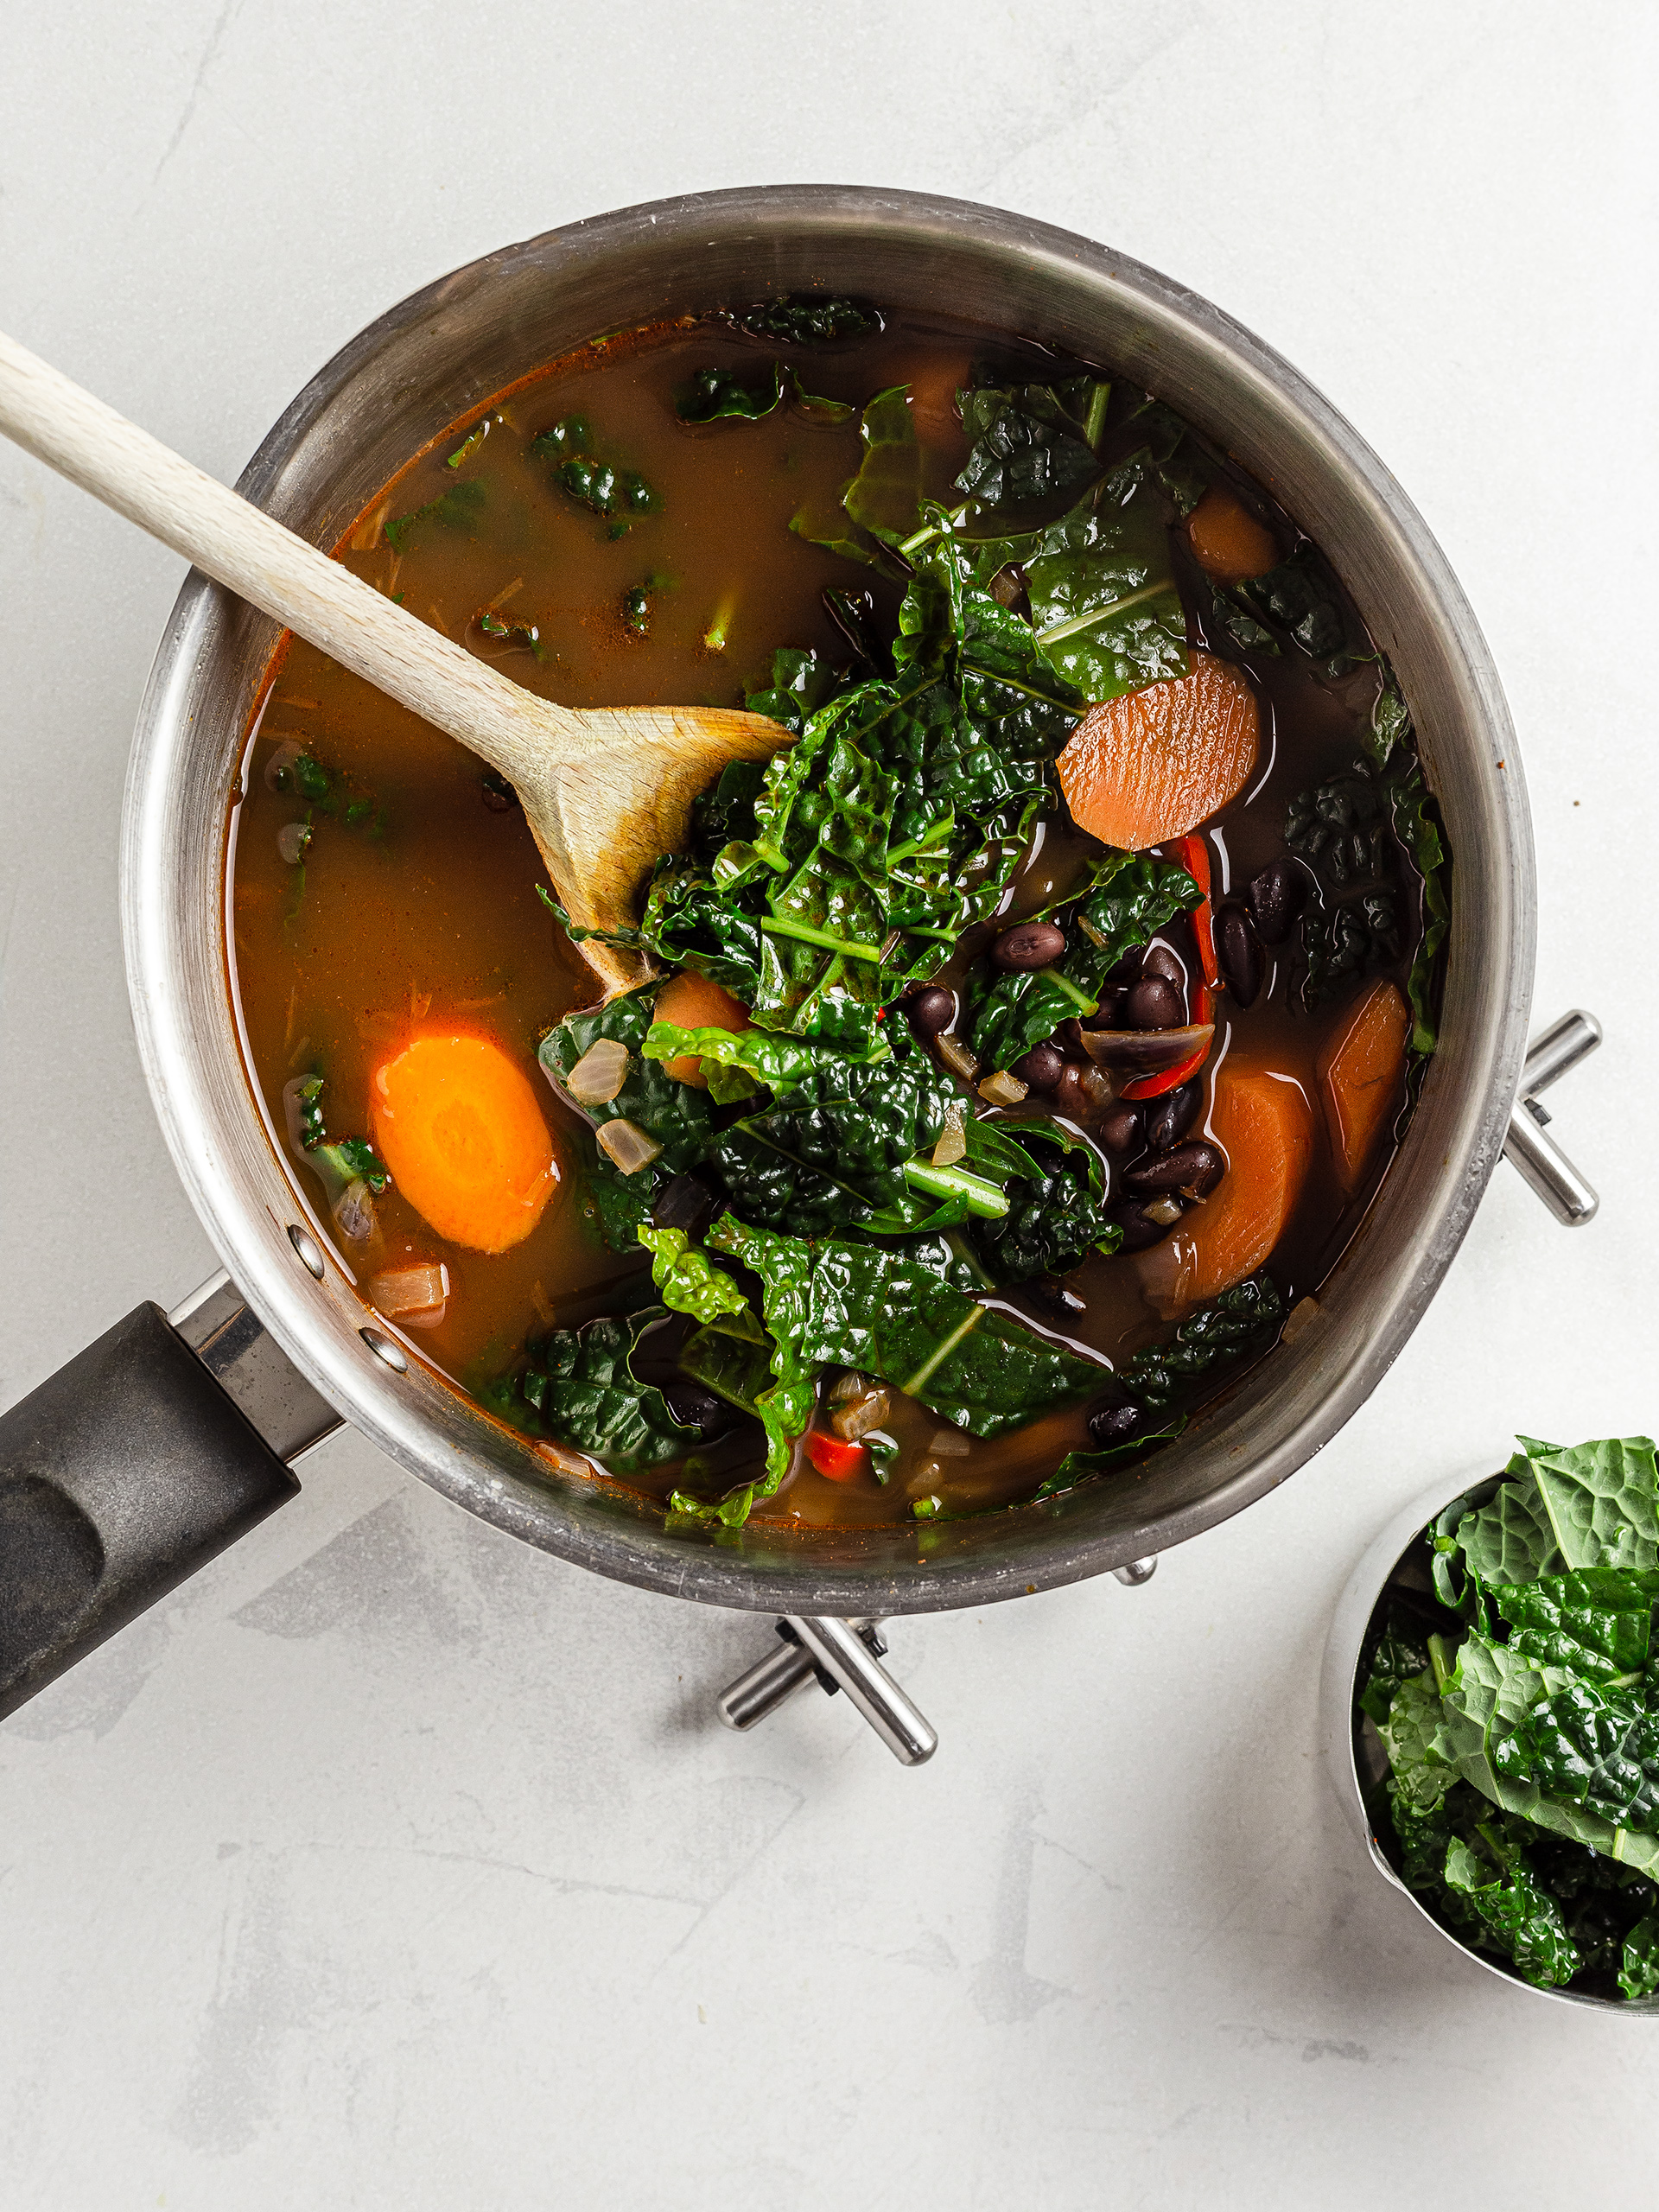 Black kale with carrot and black beans soup